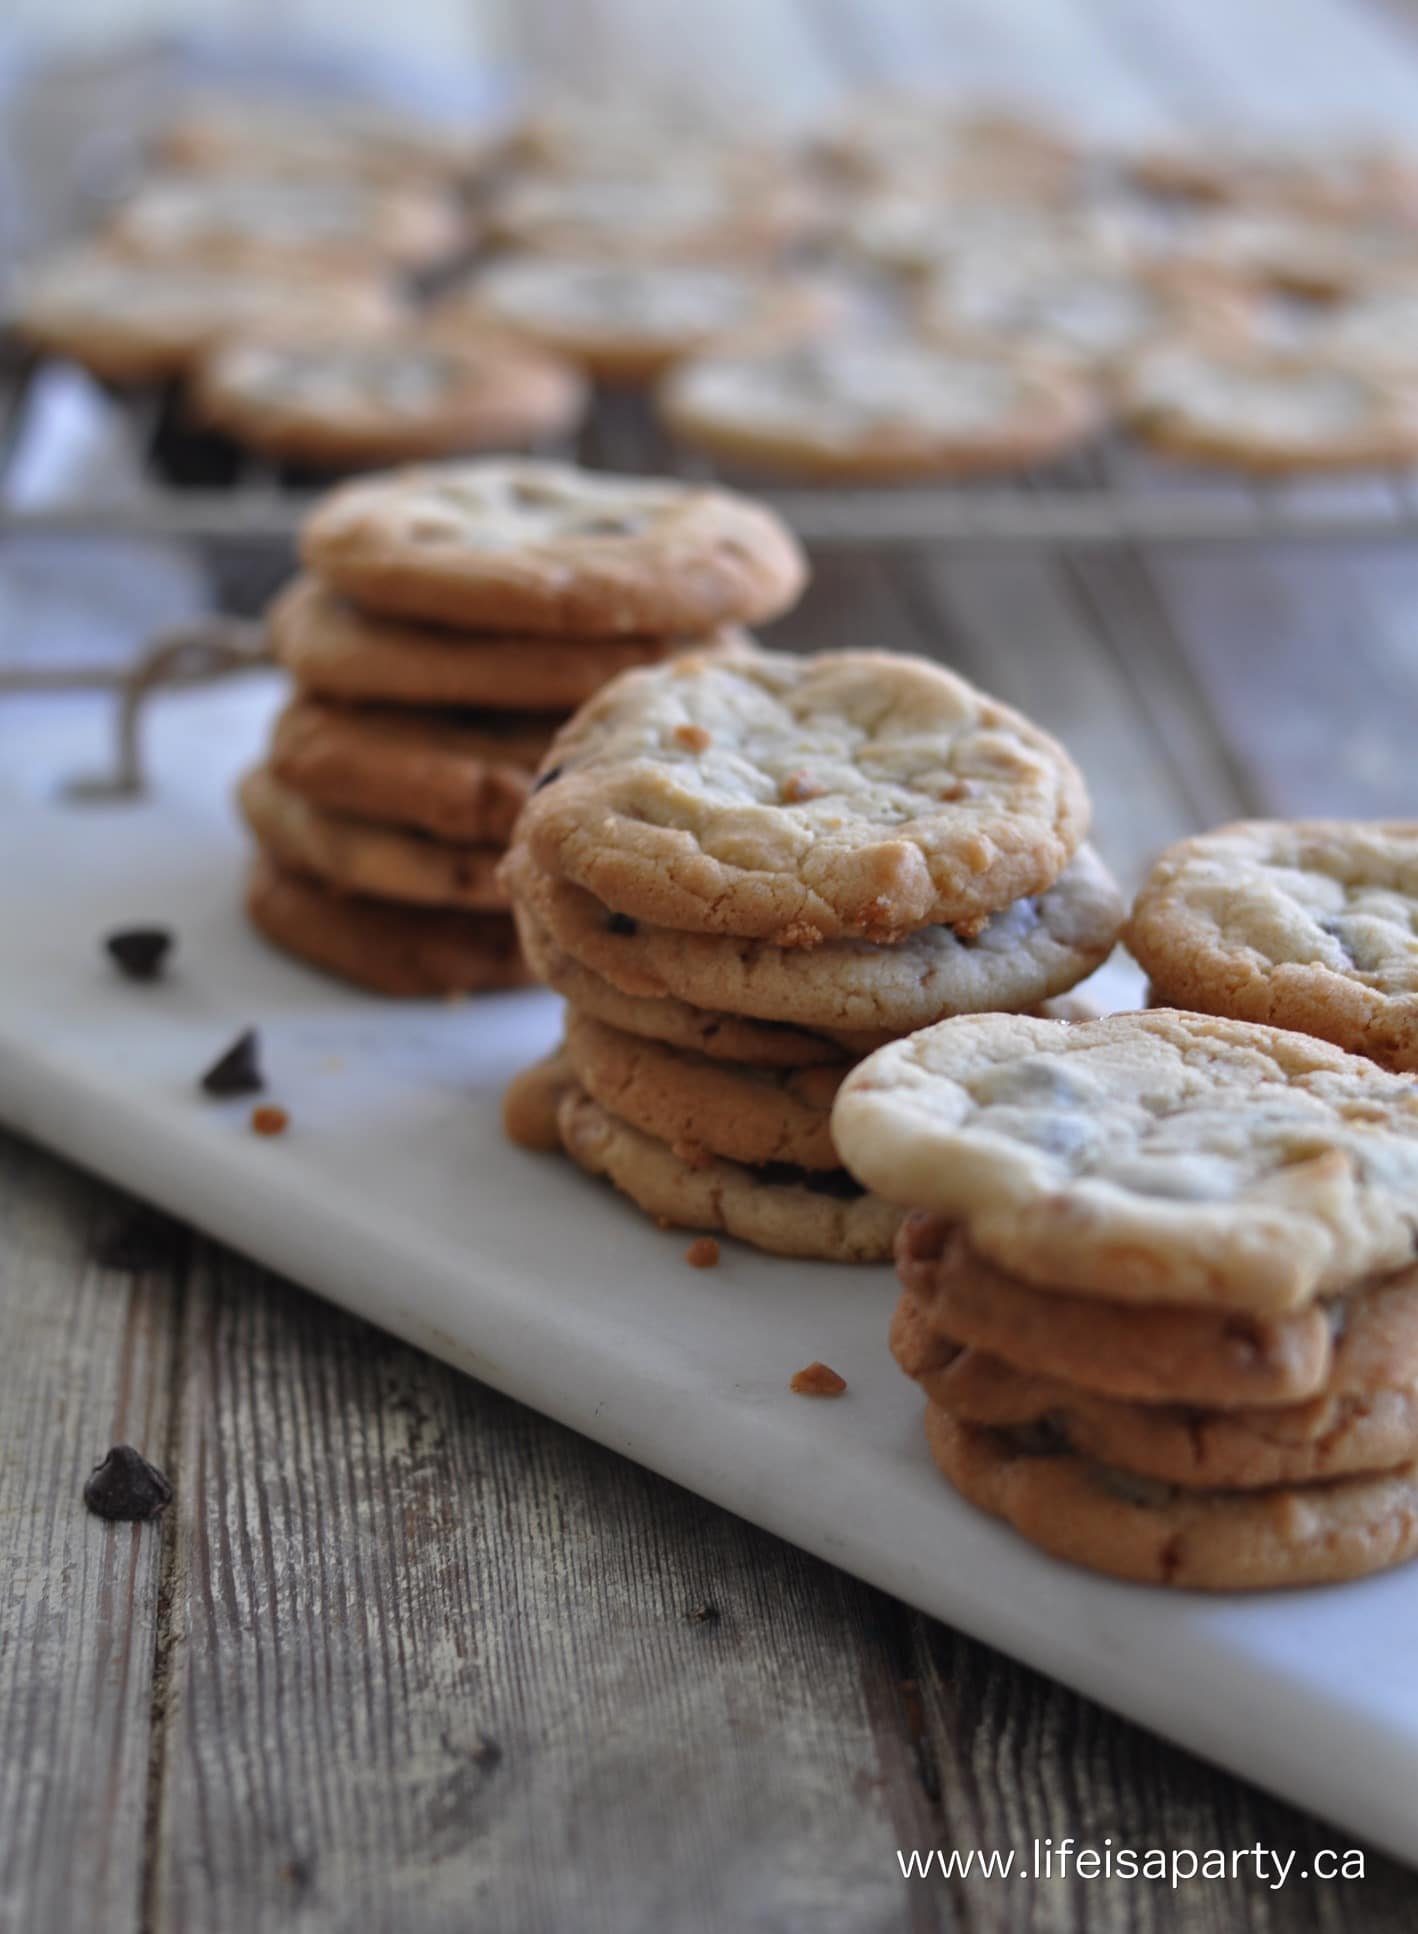 Toffee Chocolate Chip Cookies recipe